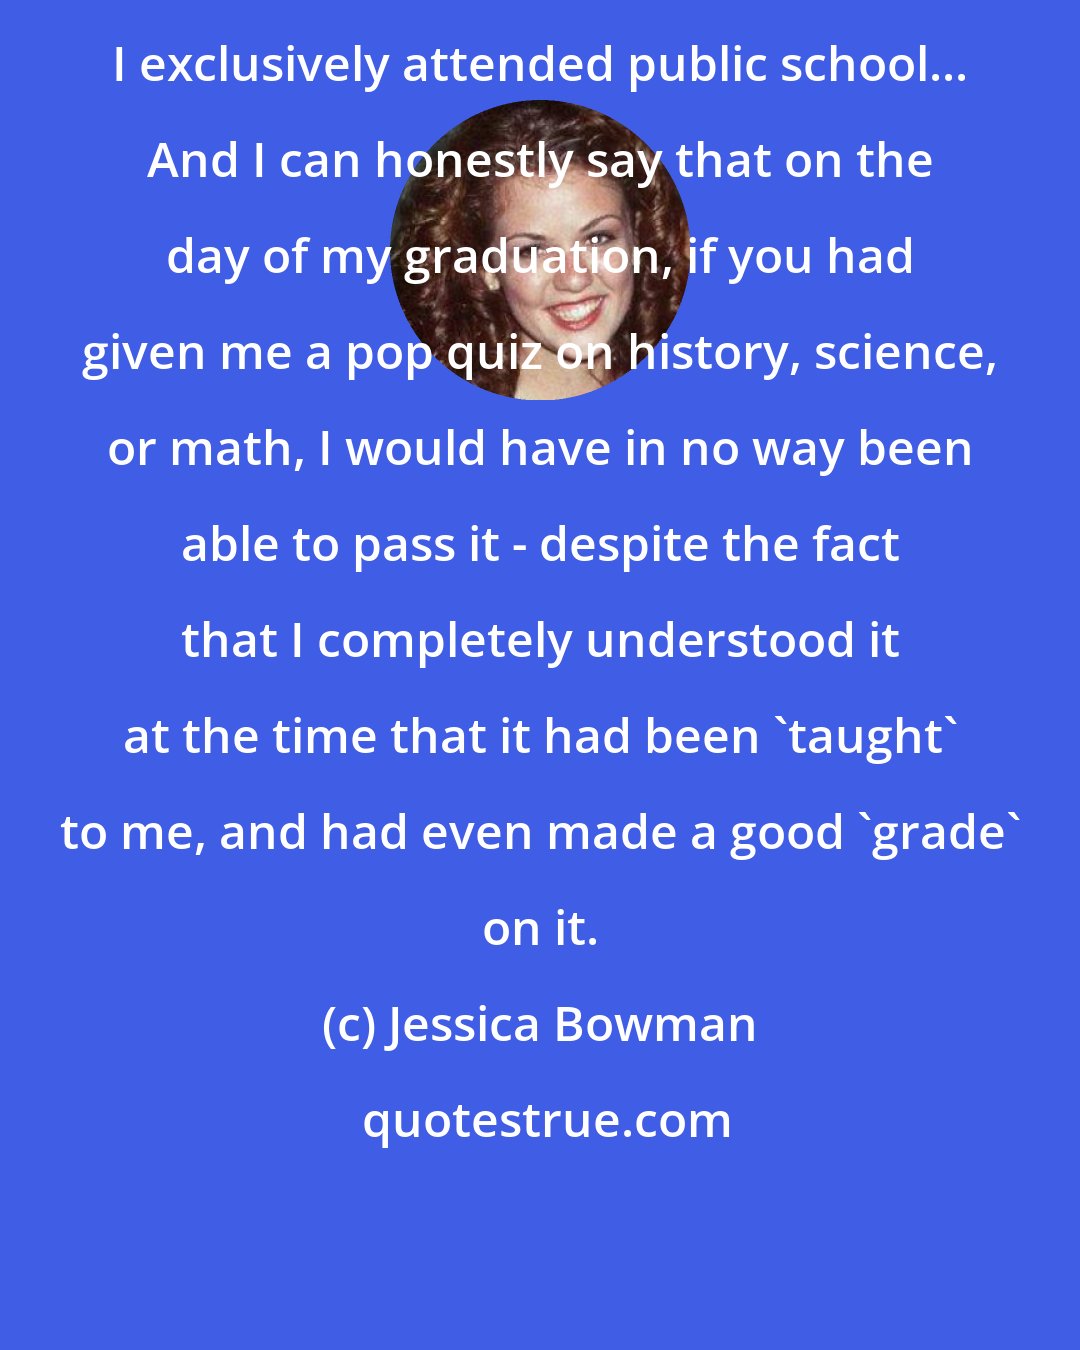 Jessica Bowman: I exclusively attended public school... And I can honestly say that on the day of my graduation, if you had given me a pop quiz on history, science, or math, I would have in no way been able to pass it - despite the fact that I completely understood it at the time that it had been 'taught' to me, and had even made a good 'grade' on it.